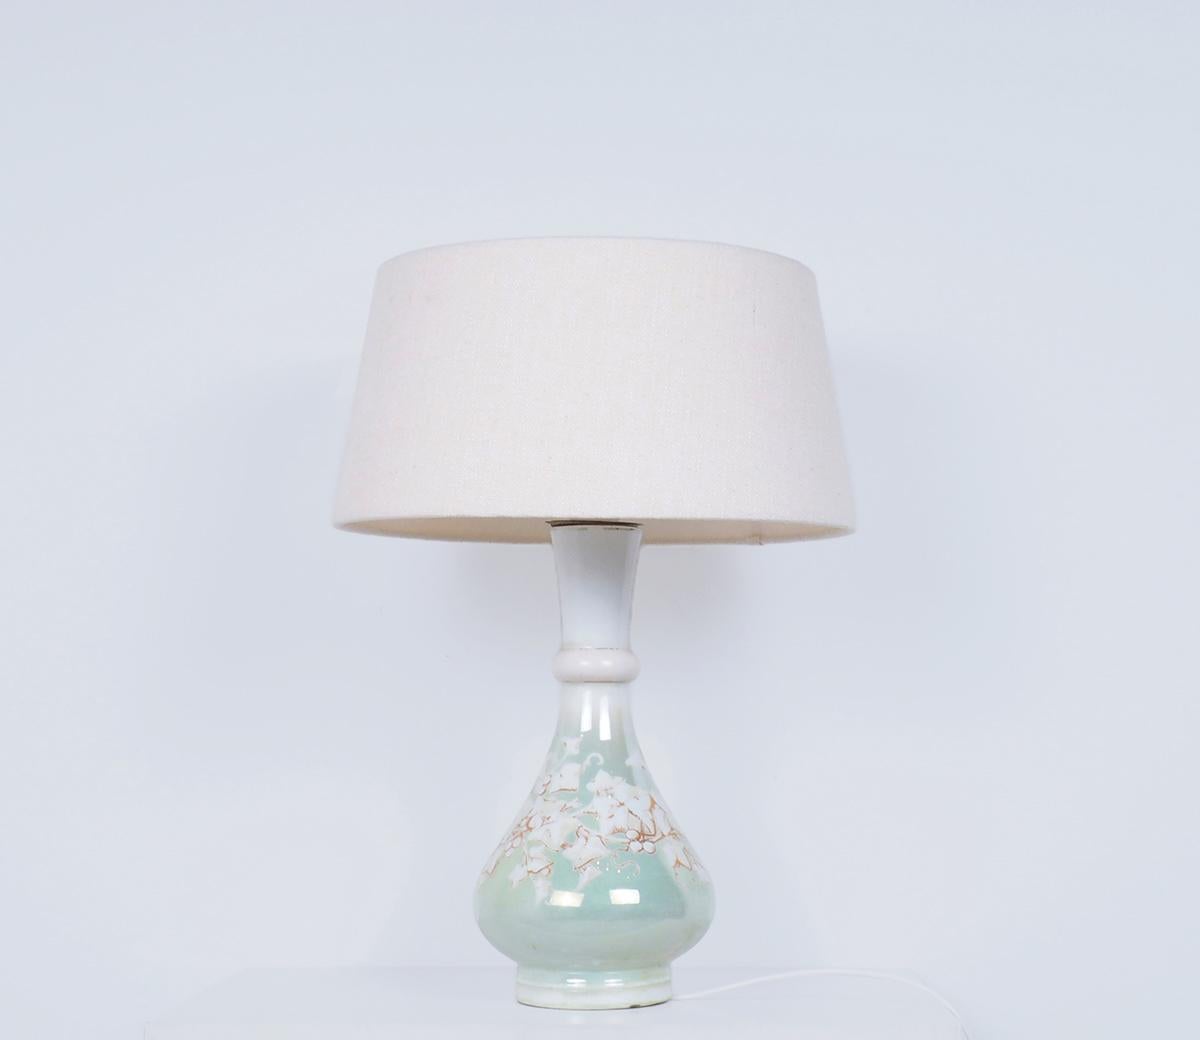 Beautiful antique French elegant porcelain table lamp made by G.B. Breveté in Paris, Belle époque time and style.

The lamp is hand-painted and has a decor of grape leaves

with gold accents on a shiny lime green background.


Very elegant table